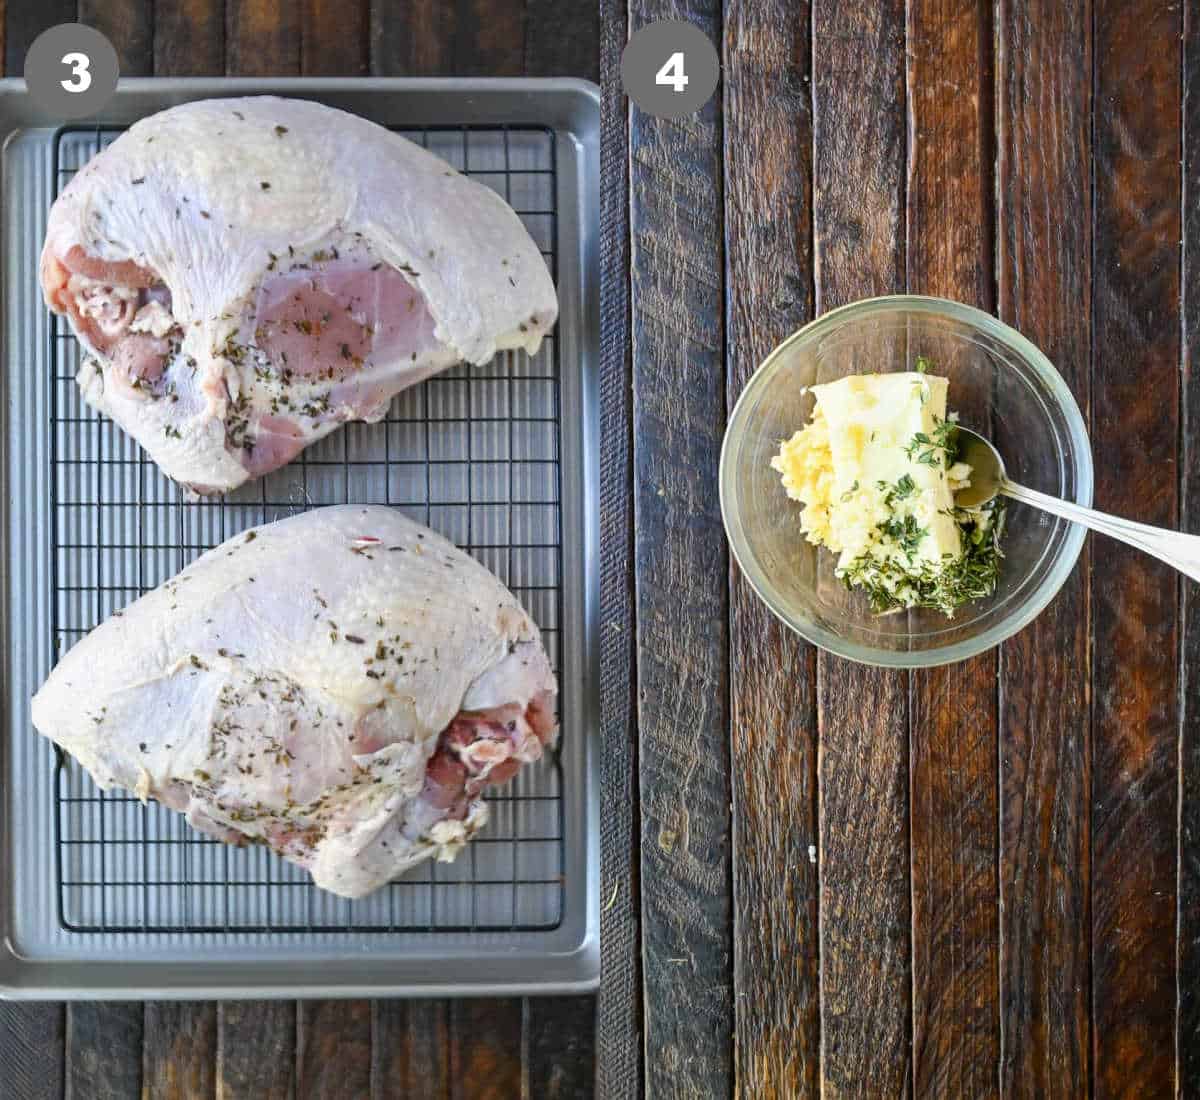 Raw turkey breast placed on a roasting pan and the garlic herb butter mixed together in a small bowl.